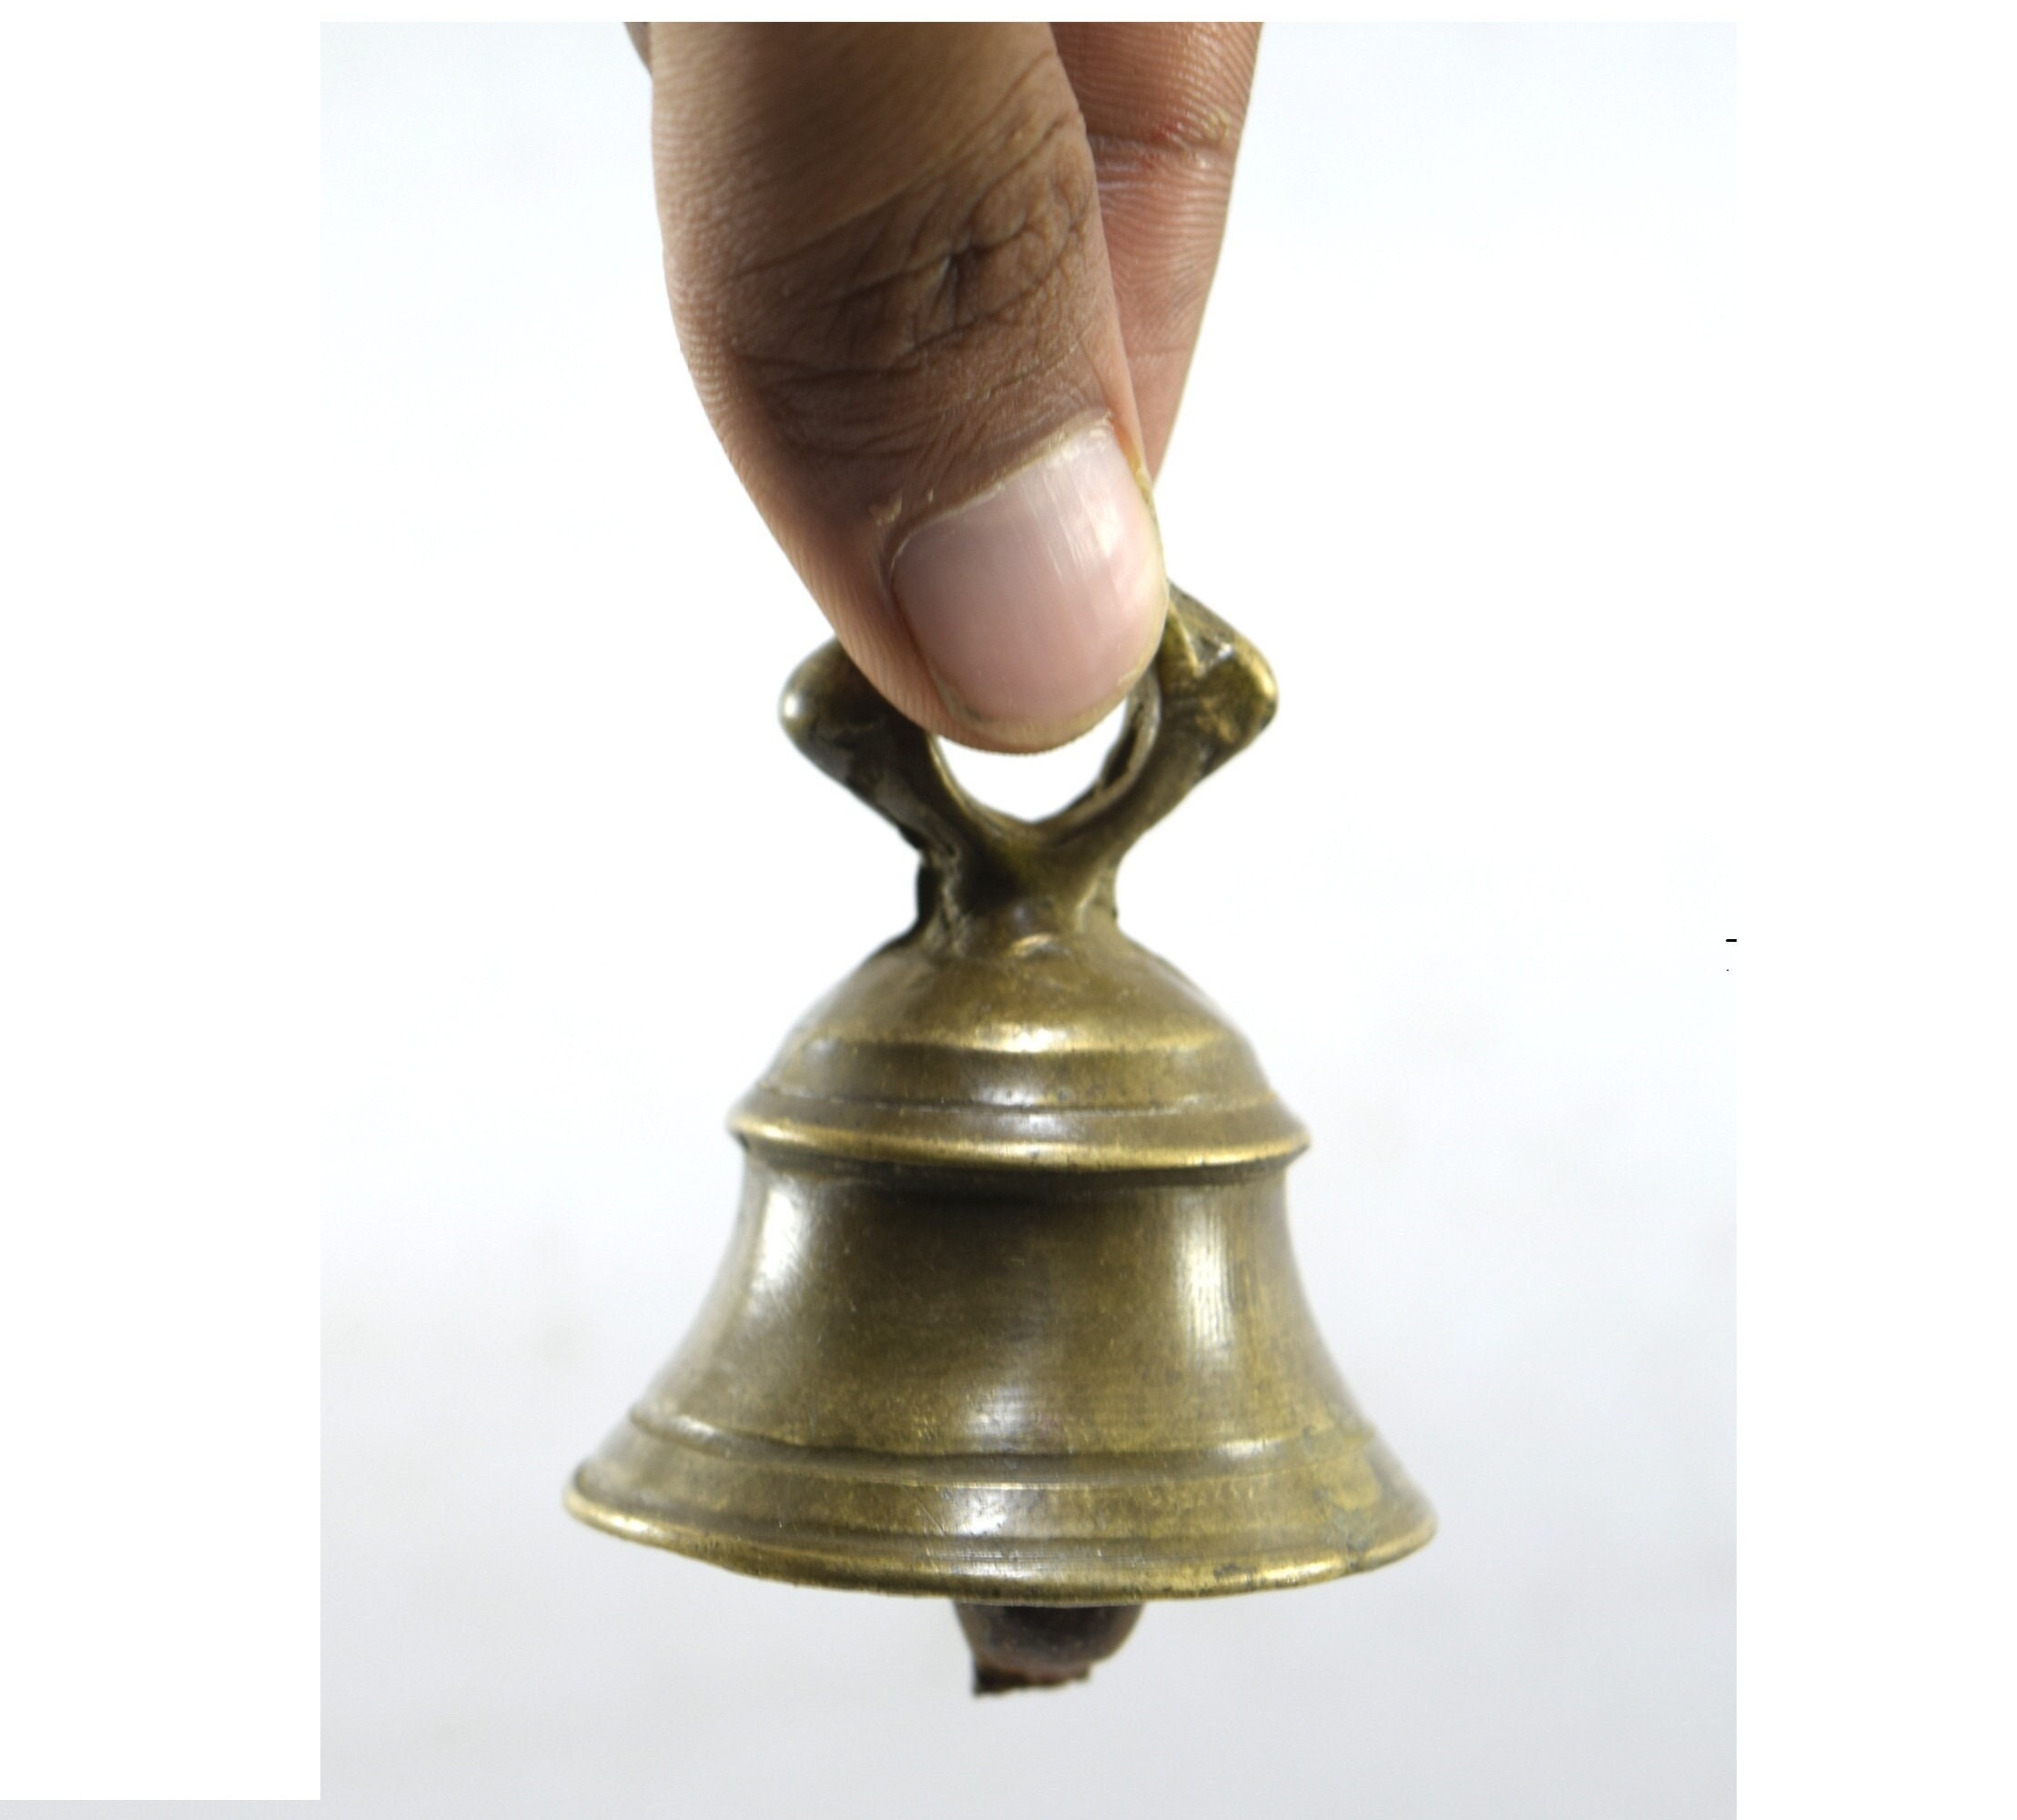 Antique Small Bell, Vintage Farm Bell, Mini Brass Bell, Primitive Bell, Old  Rusty Cowbell, Collectible Bell, Huge Bell 